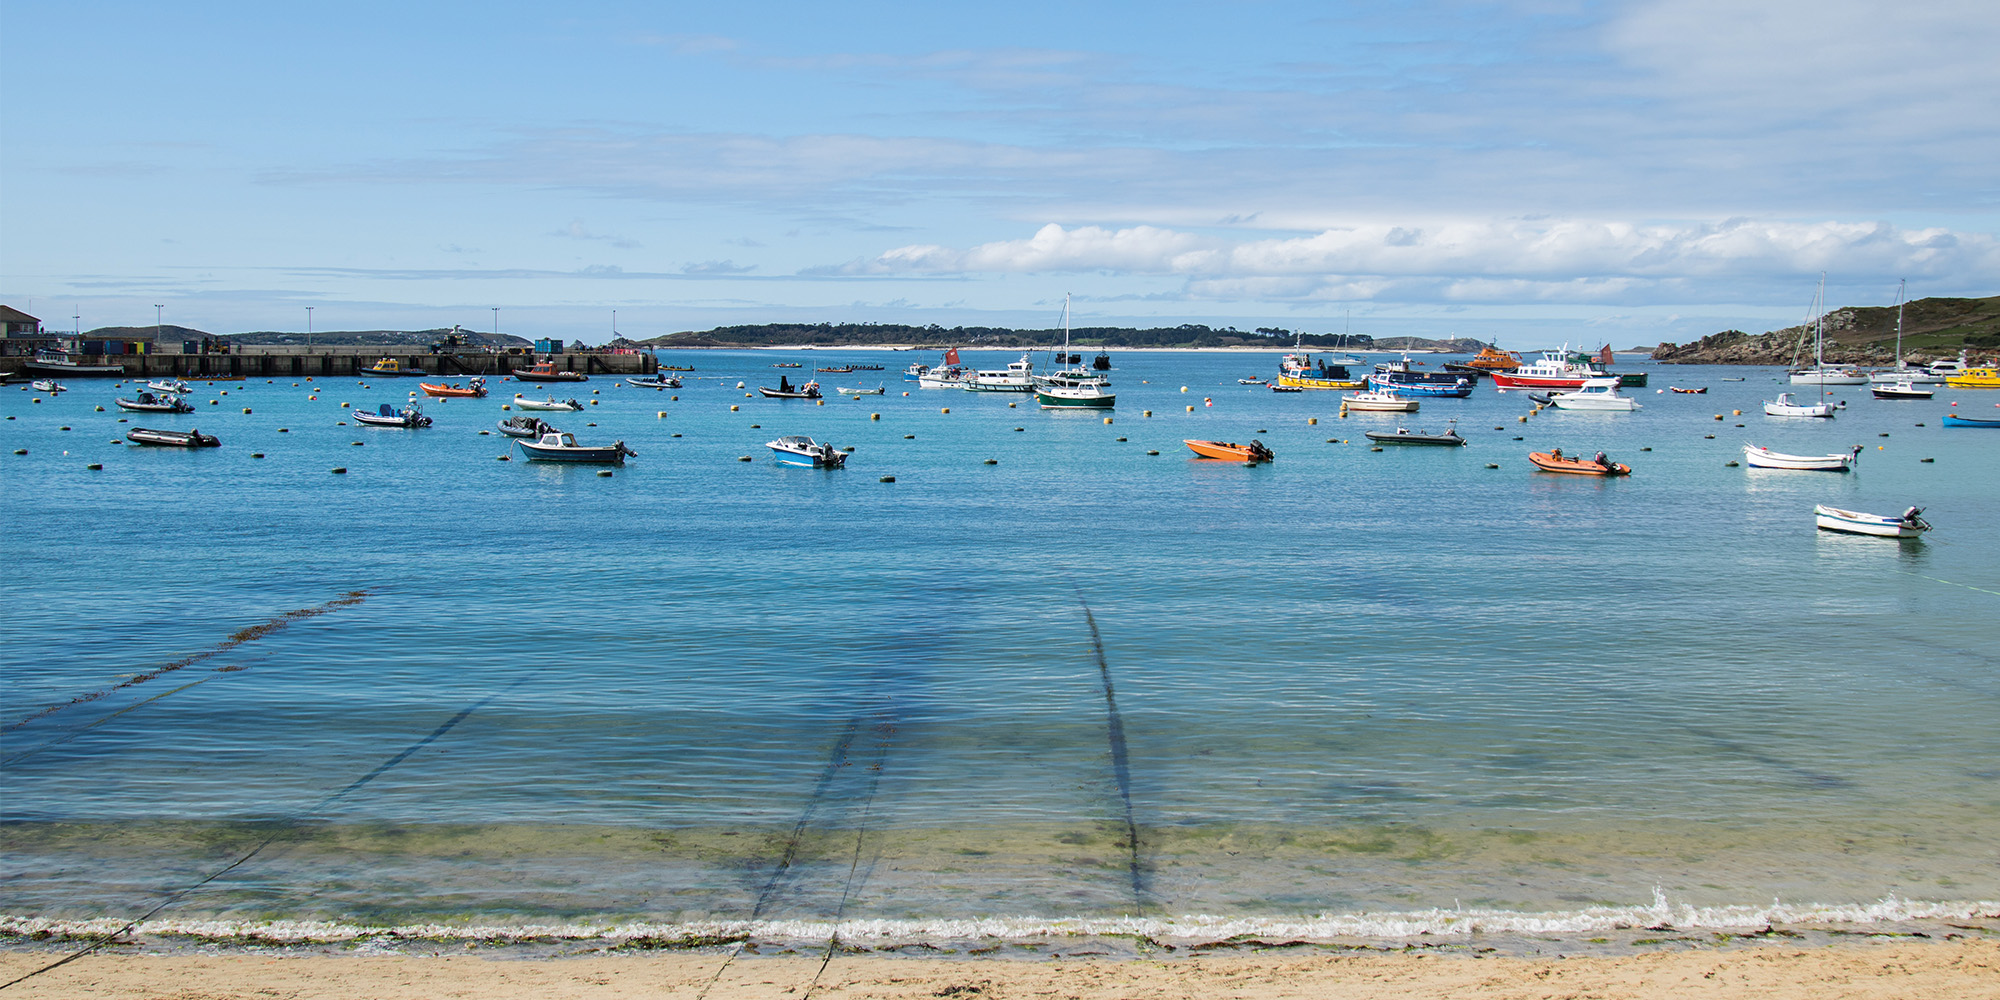 isles of scilly travel parking